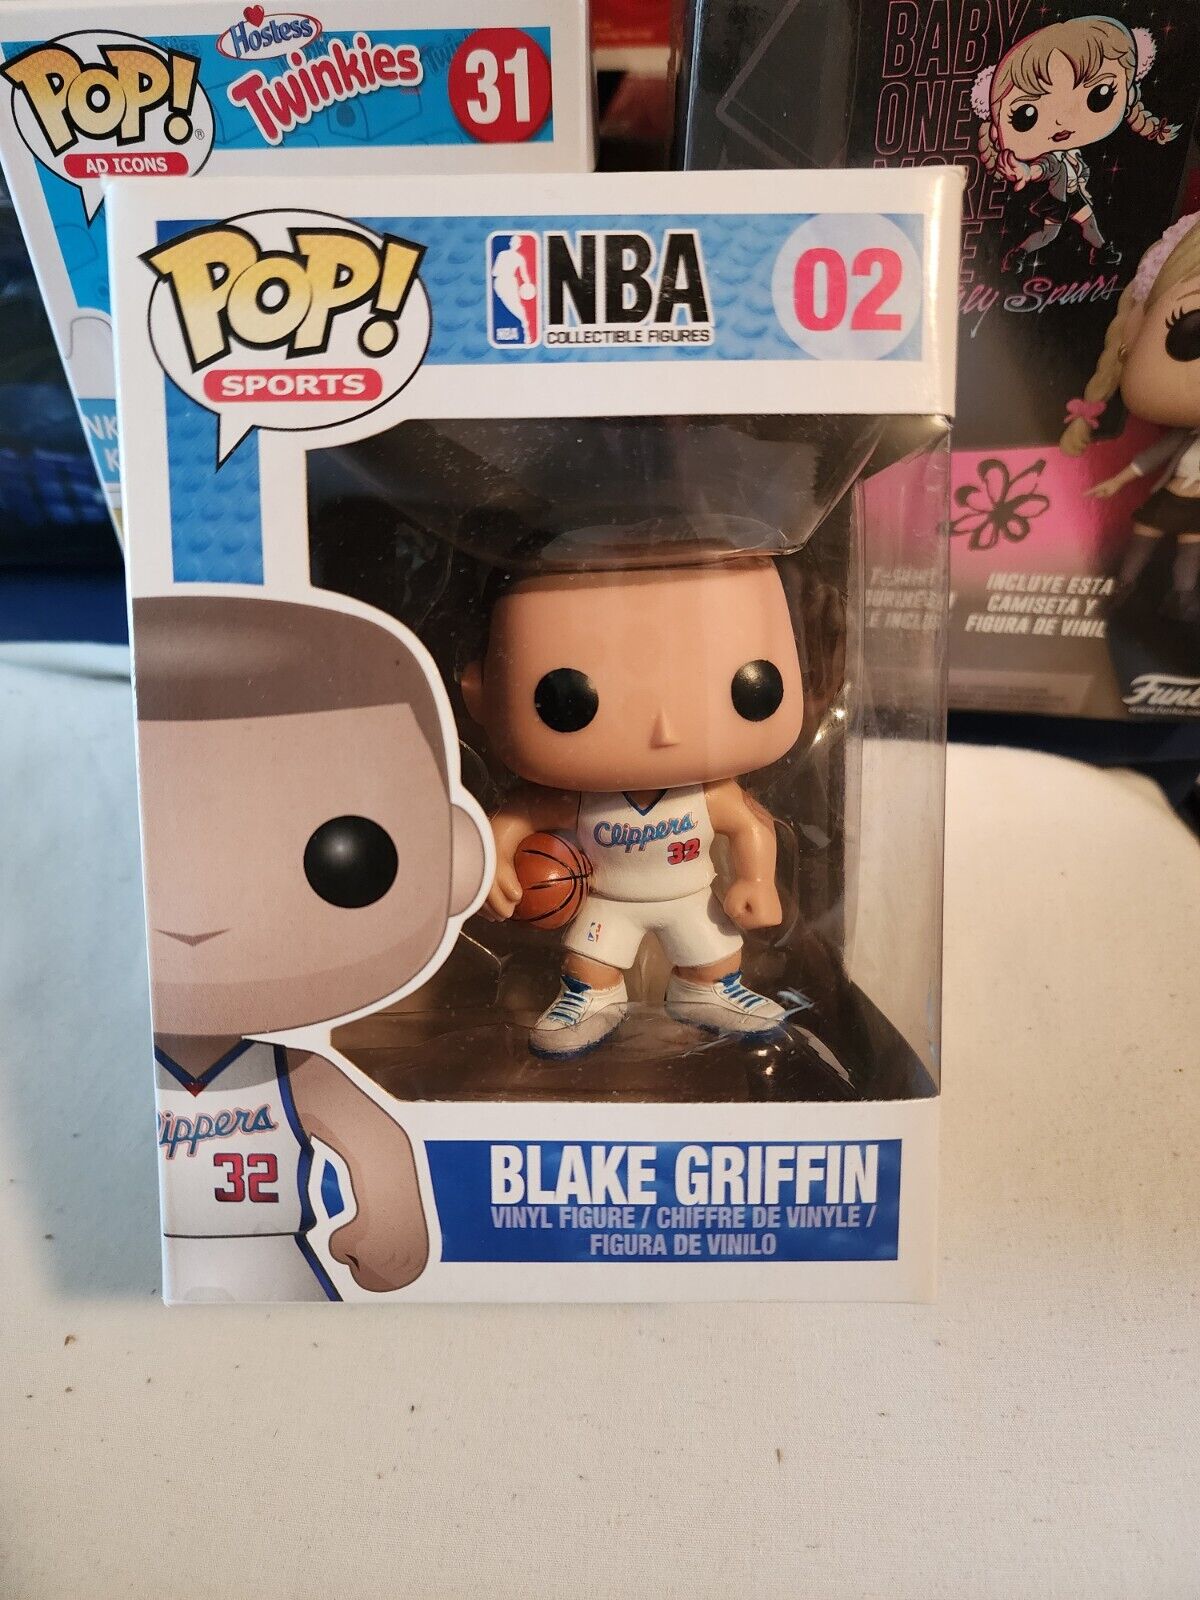 BLAKE GRIFFIN NBA Funko Pop Sports Vinyl Figure 02 Vaulted Los Angeles Clippers